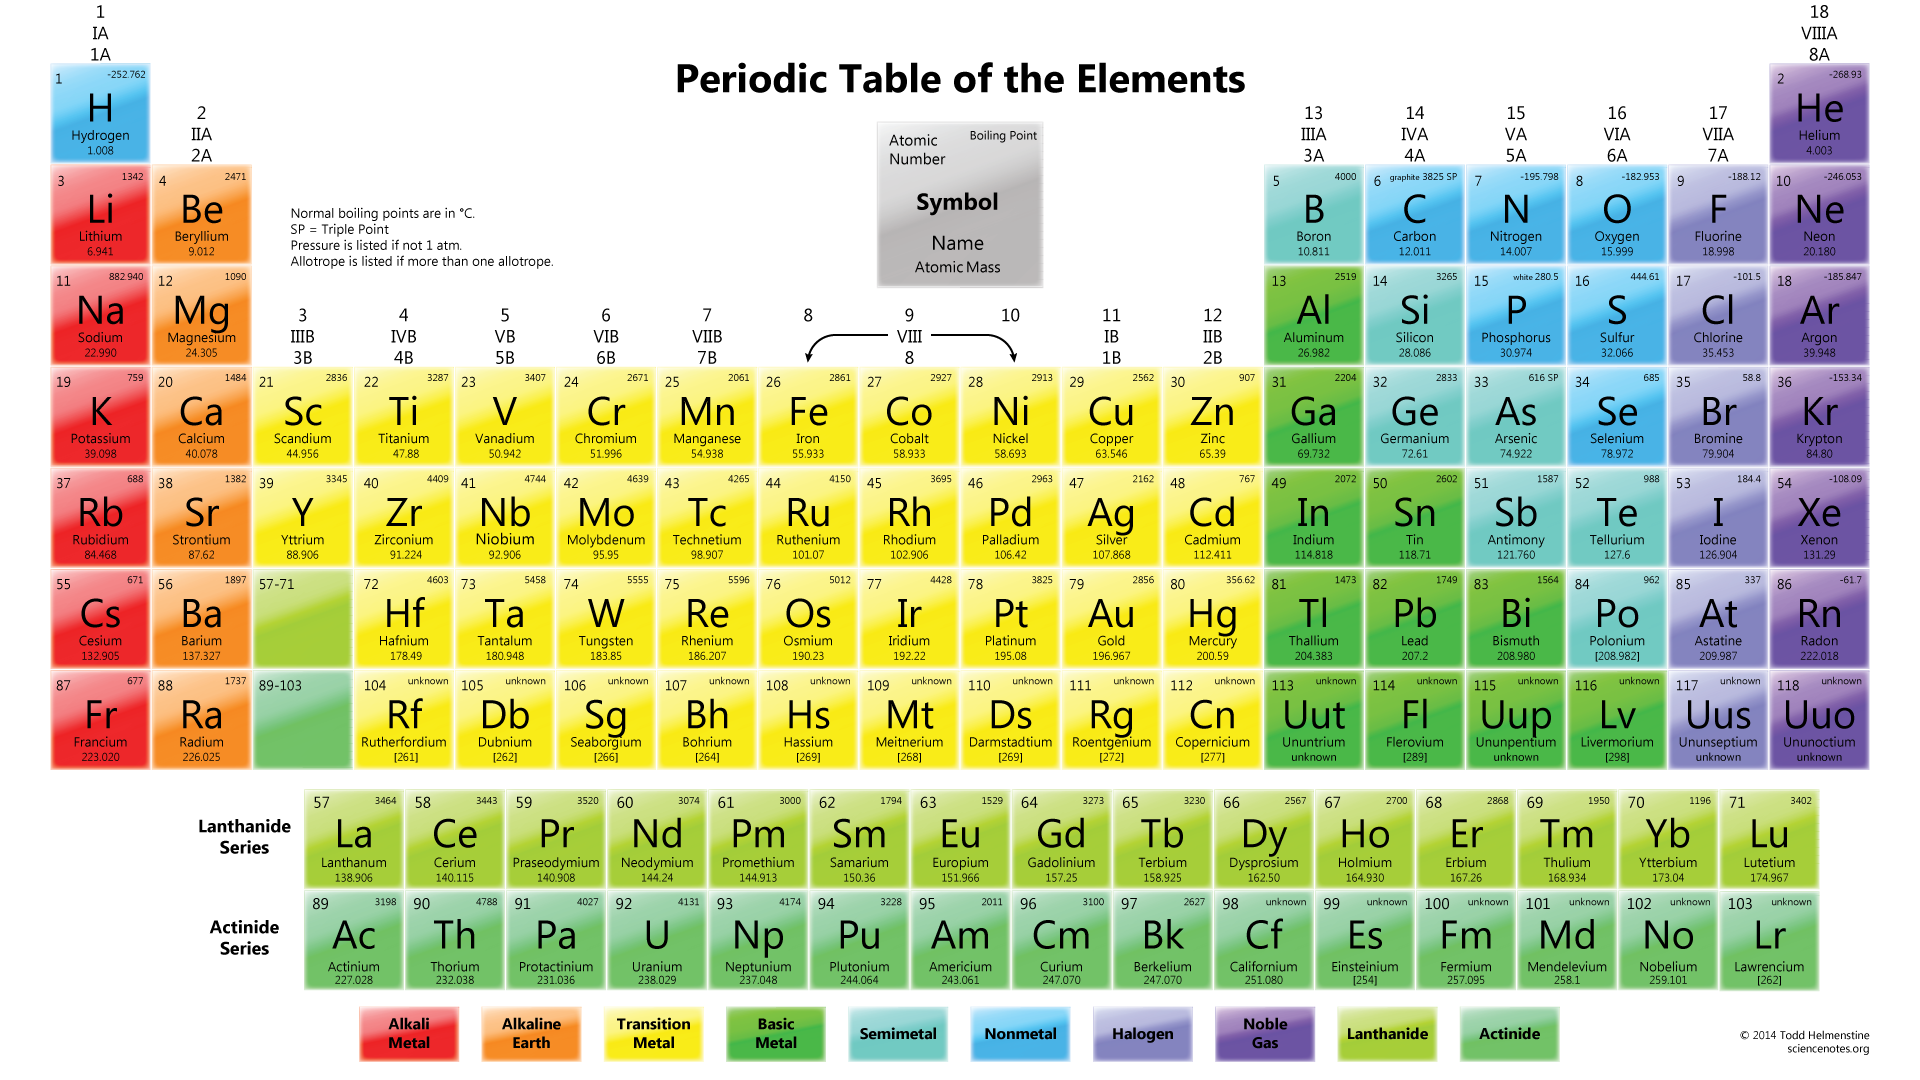 What is the Periodic Table of the Elements